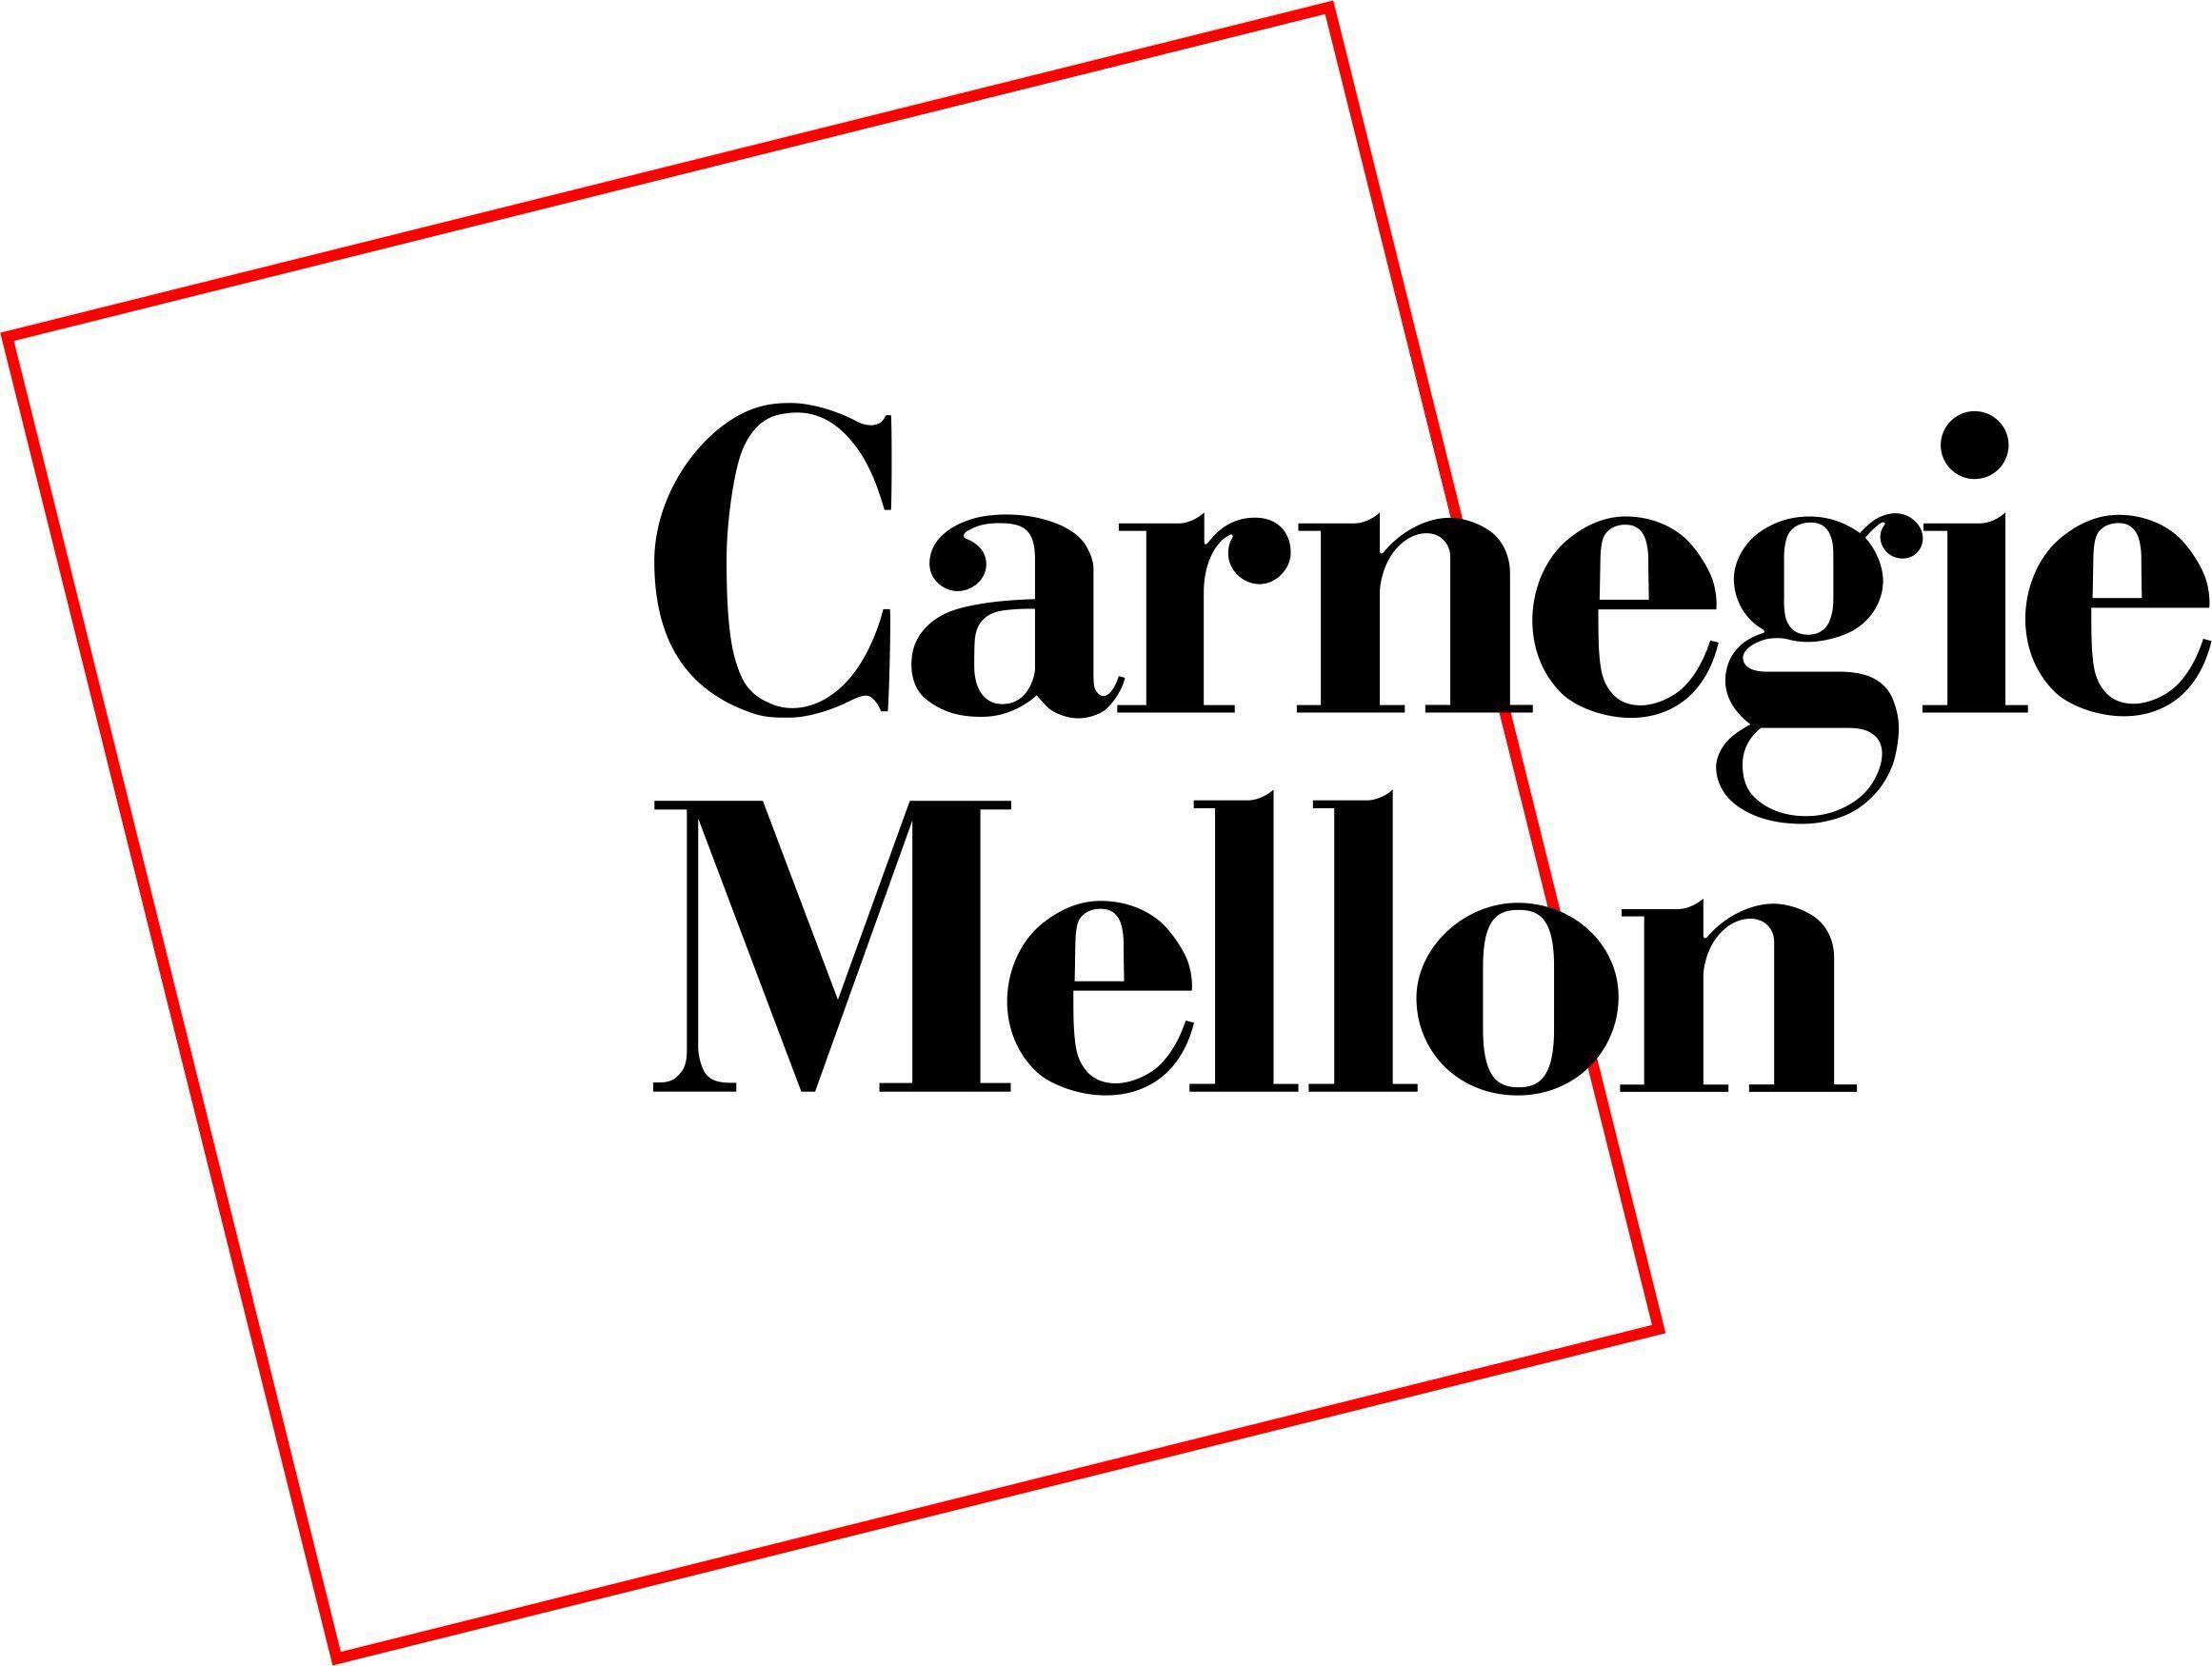 Carnegie Melon Logo - The Tilted Square – Tinkering Engineer